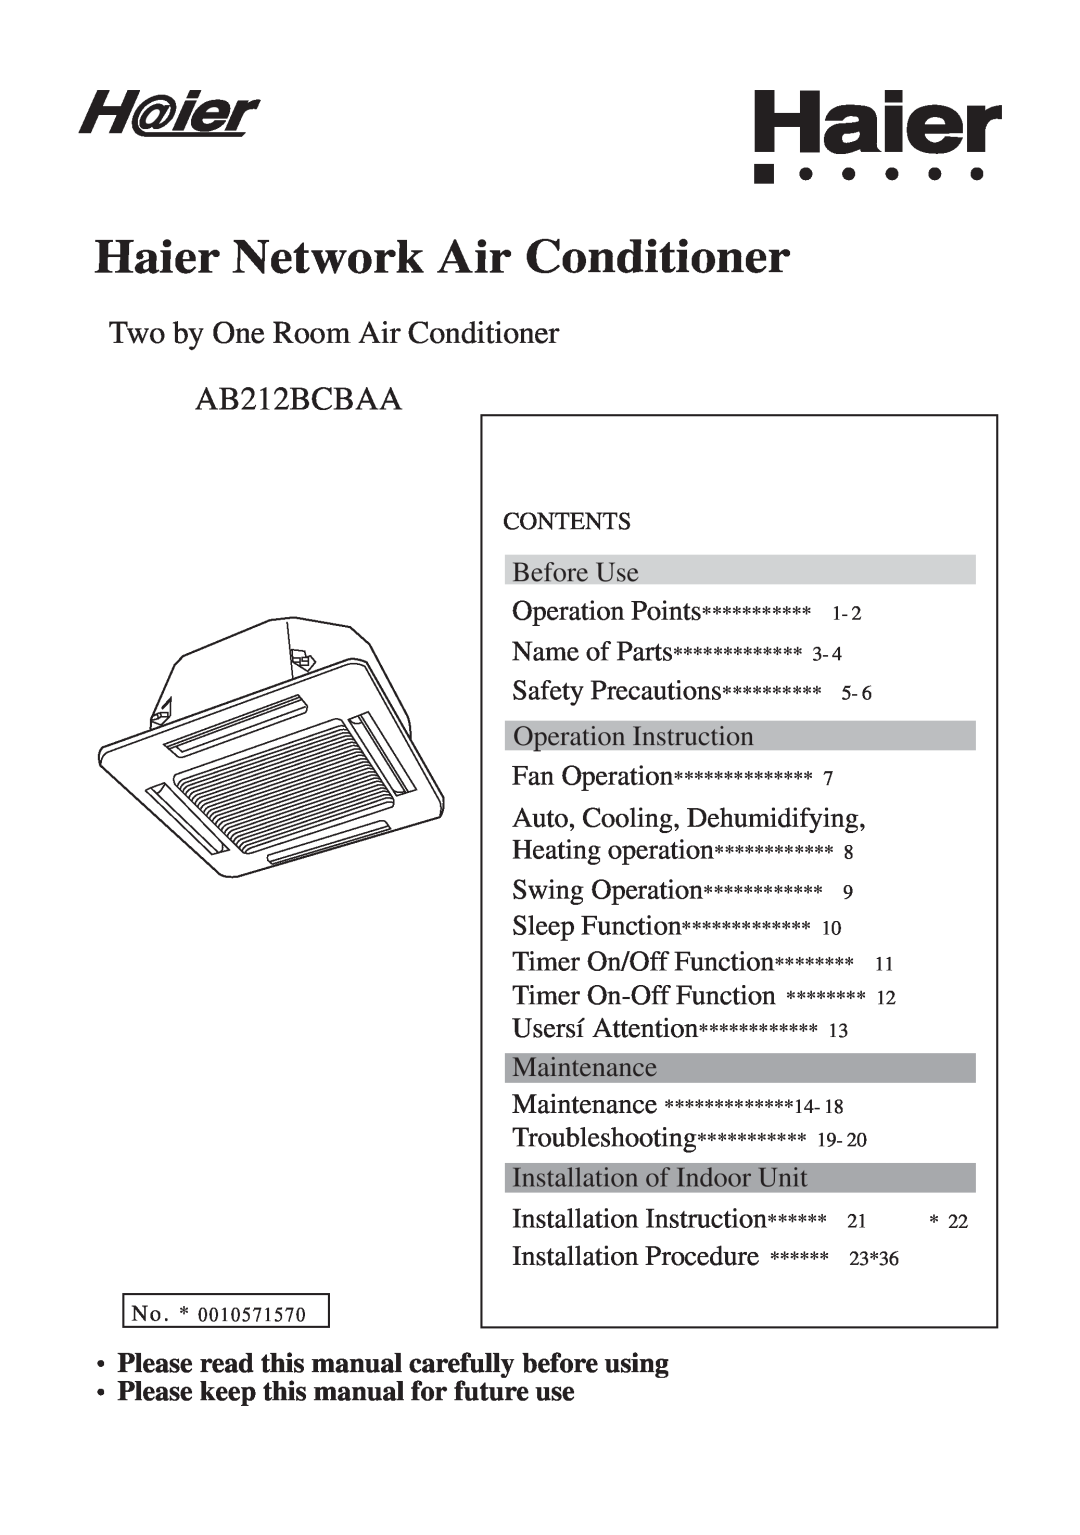 Haier 0010571570 manual AB212BCBAA, Two by One Room Air Conditioner, Haier Network Air Conditioner 